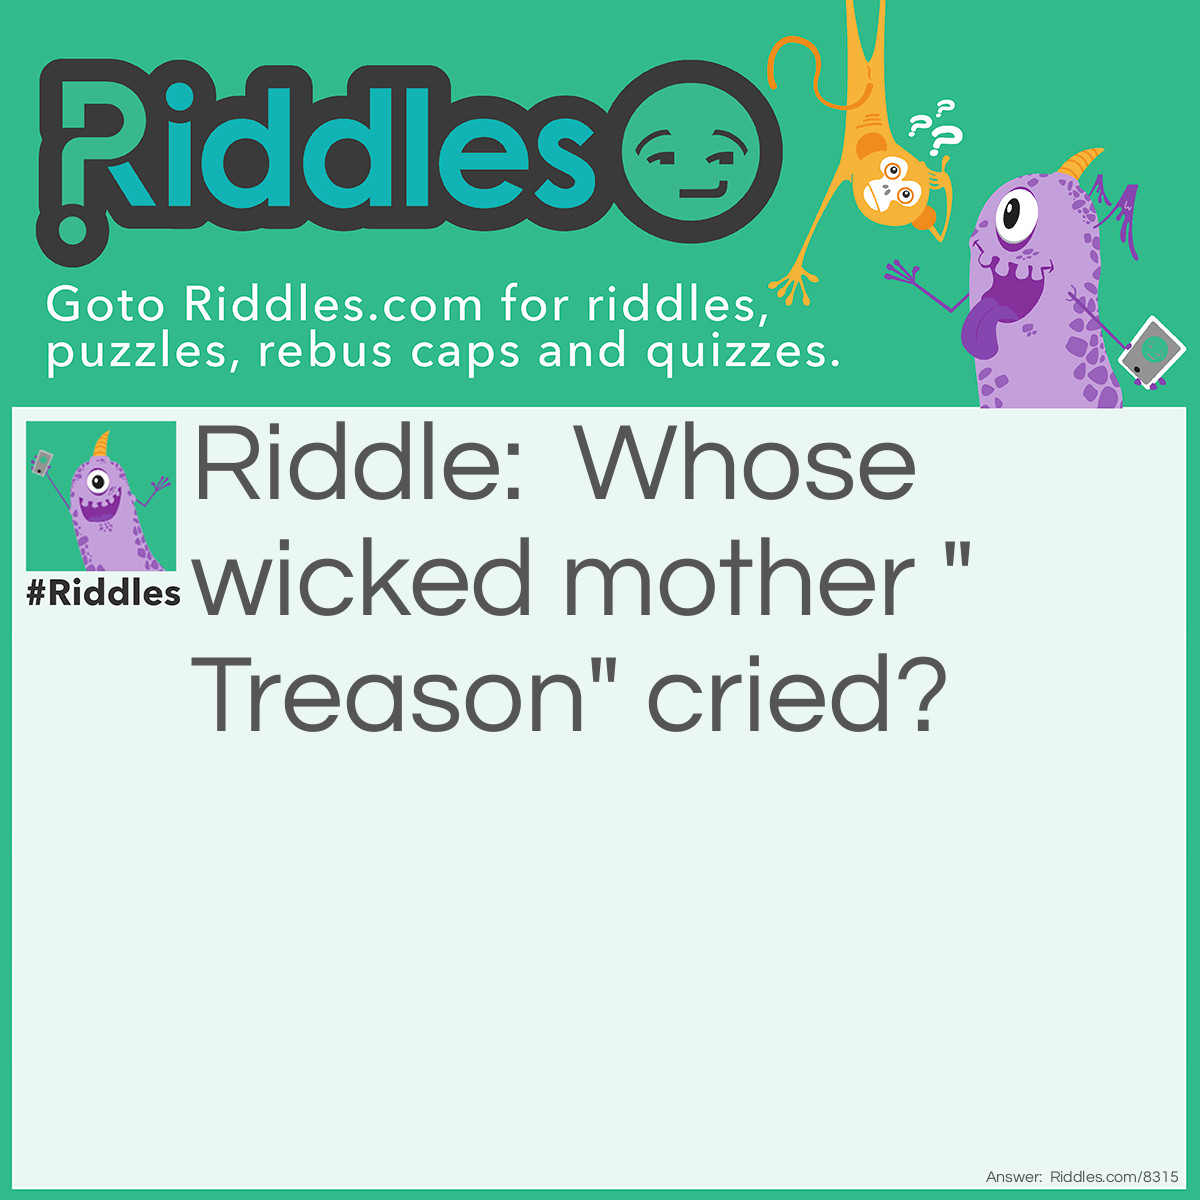 Riddle: Whose wicked mother "Treason" cried? Answer: Ahaziah’s mother—2 Chron. xxiii. 13.